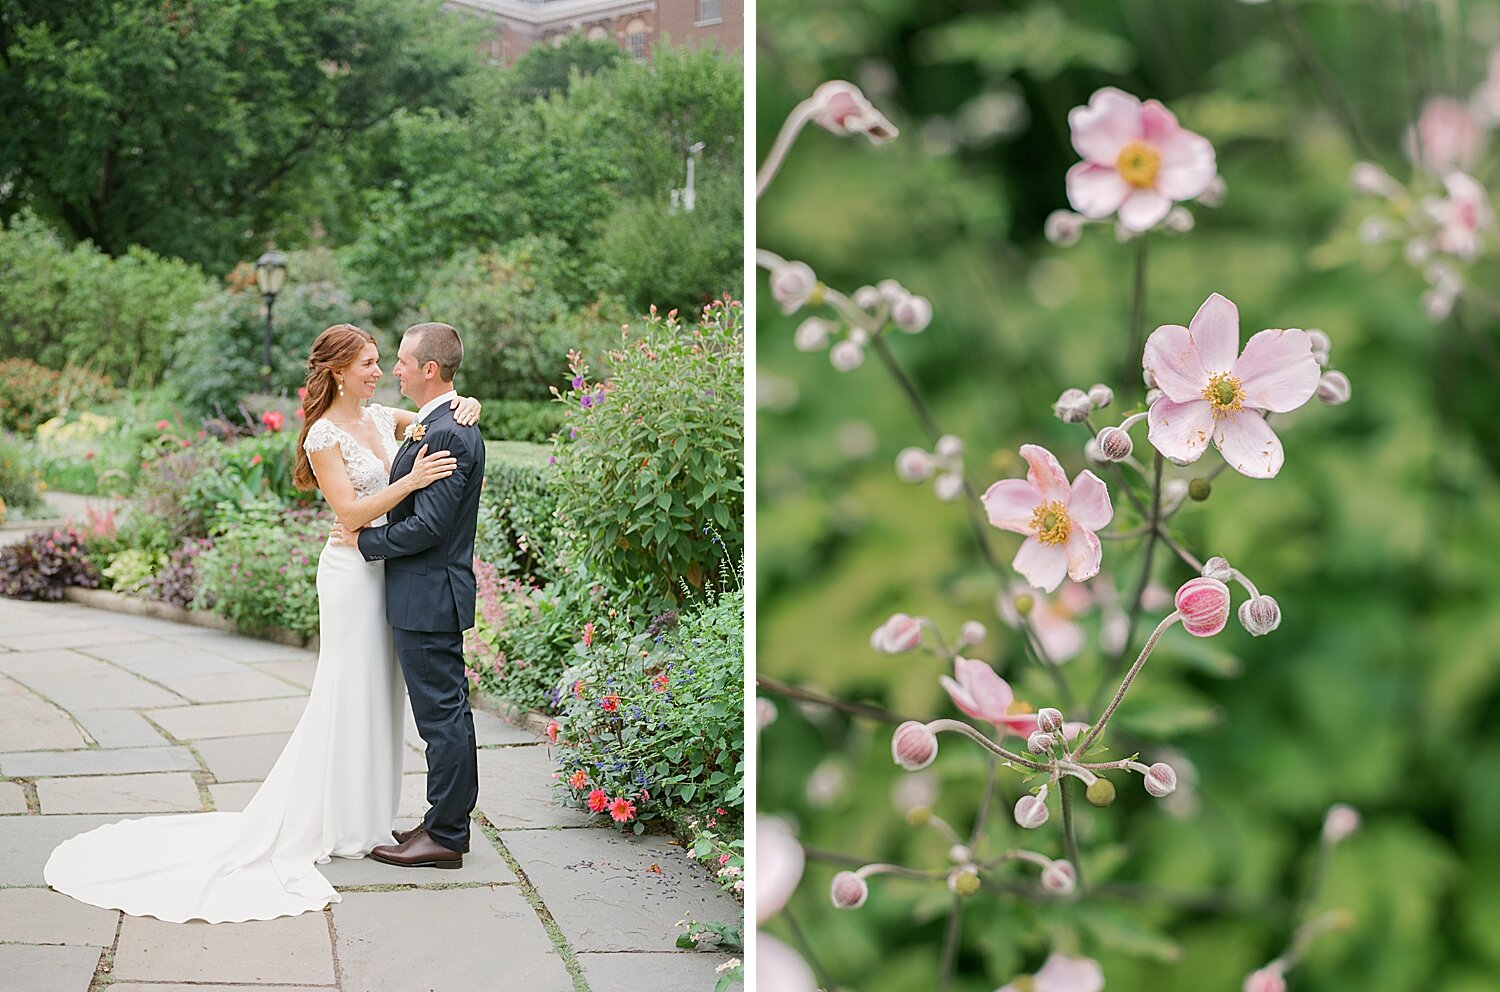 NYC wedding portraits in gardens | Asher Gardner Photography | Elopement at the Central Park Conservatory Gardens